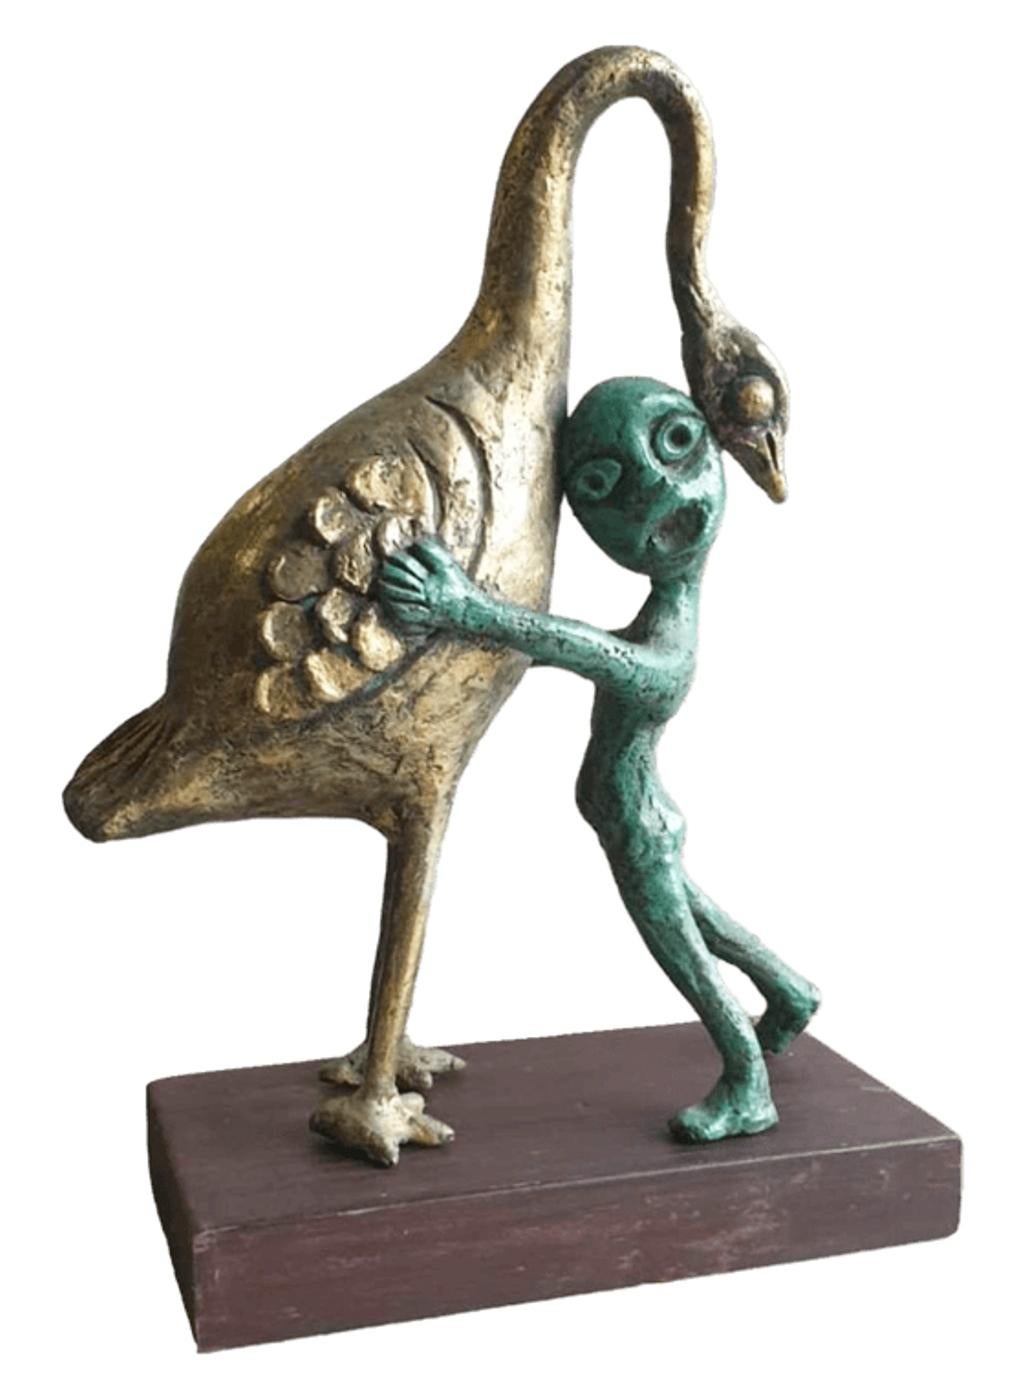 Innocent Life, Figurative Bronze by Contemporary Indian Artist "In Stock"